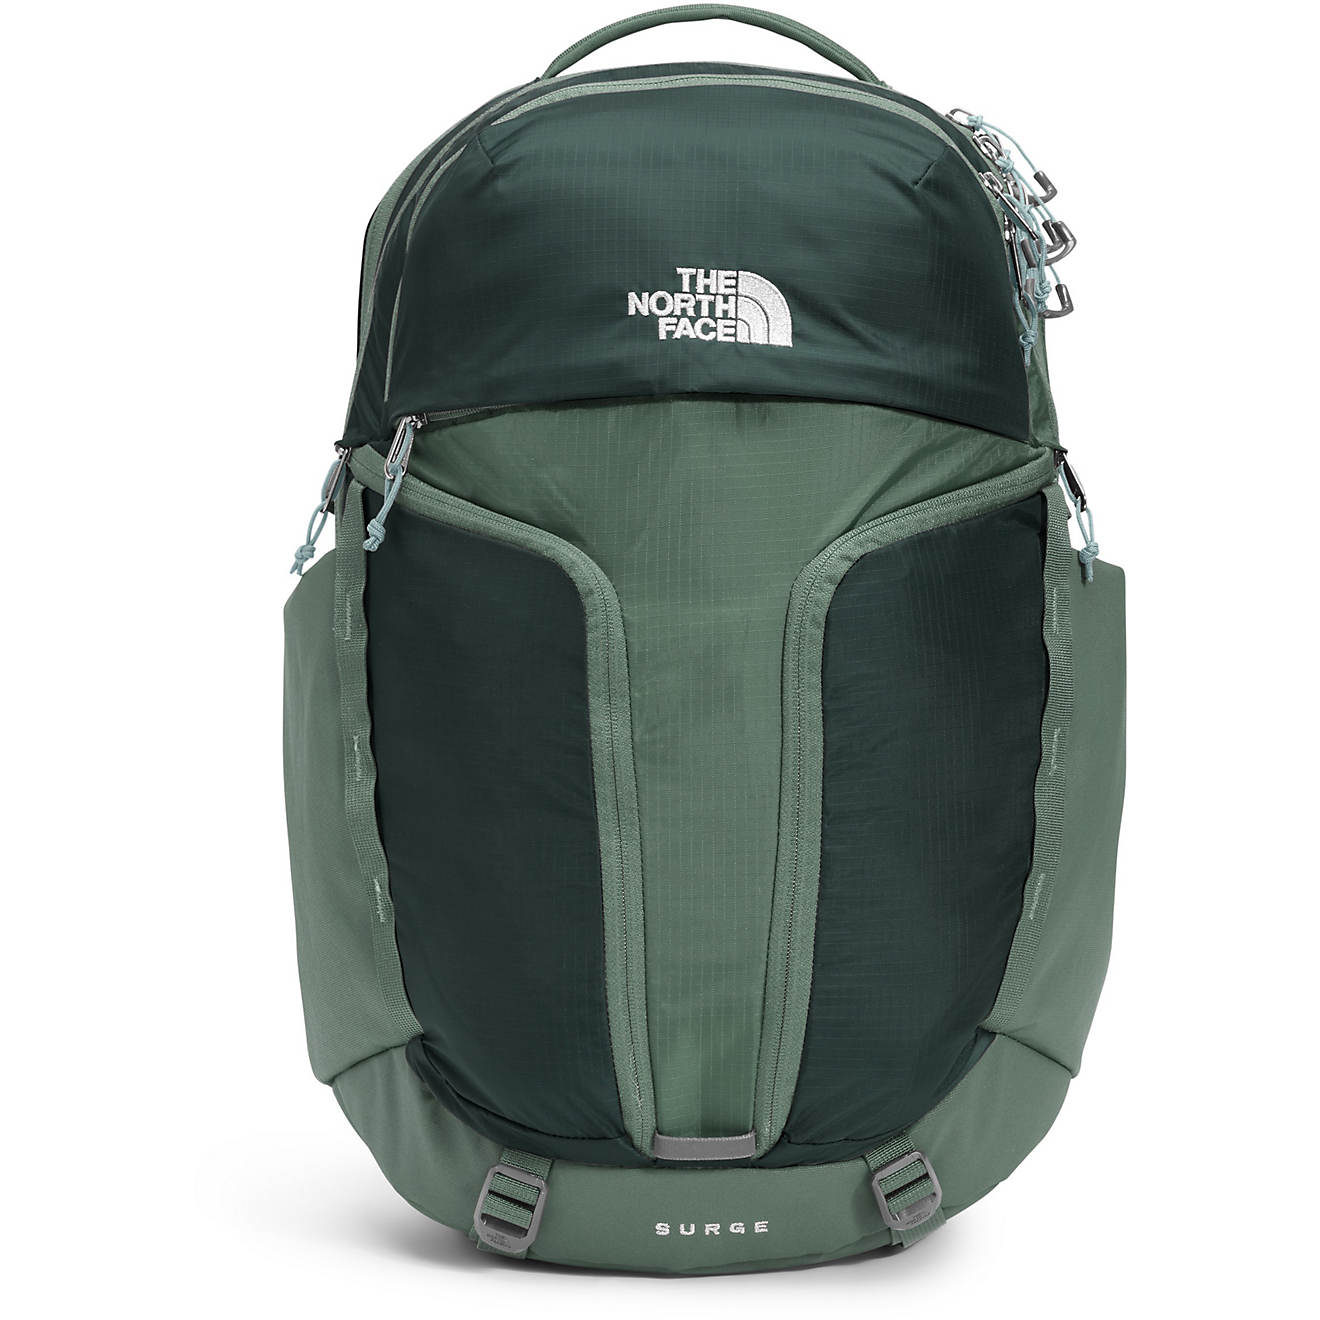 The North Face Surge Backpack | Academy